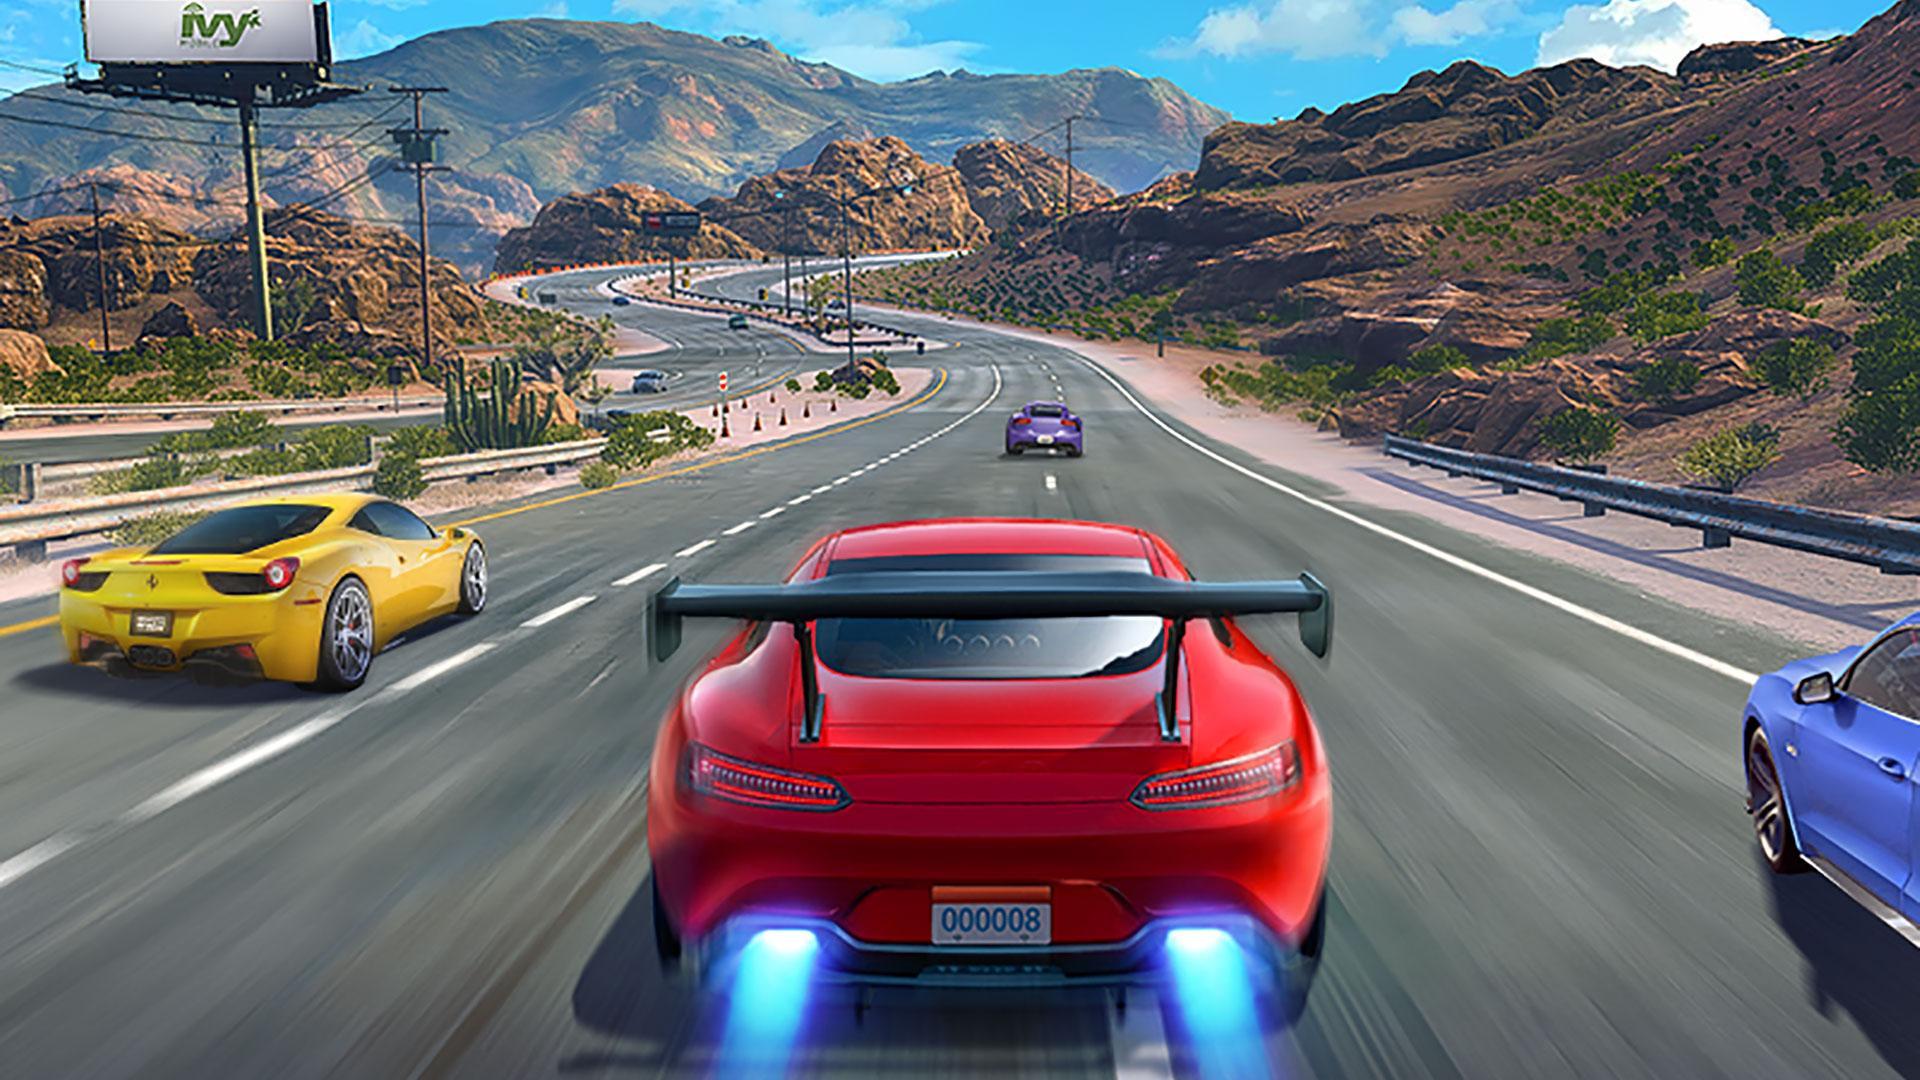 Street Racing 3d For Android Apk Download - download roblox racing 3d apk latest version game for pc